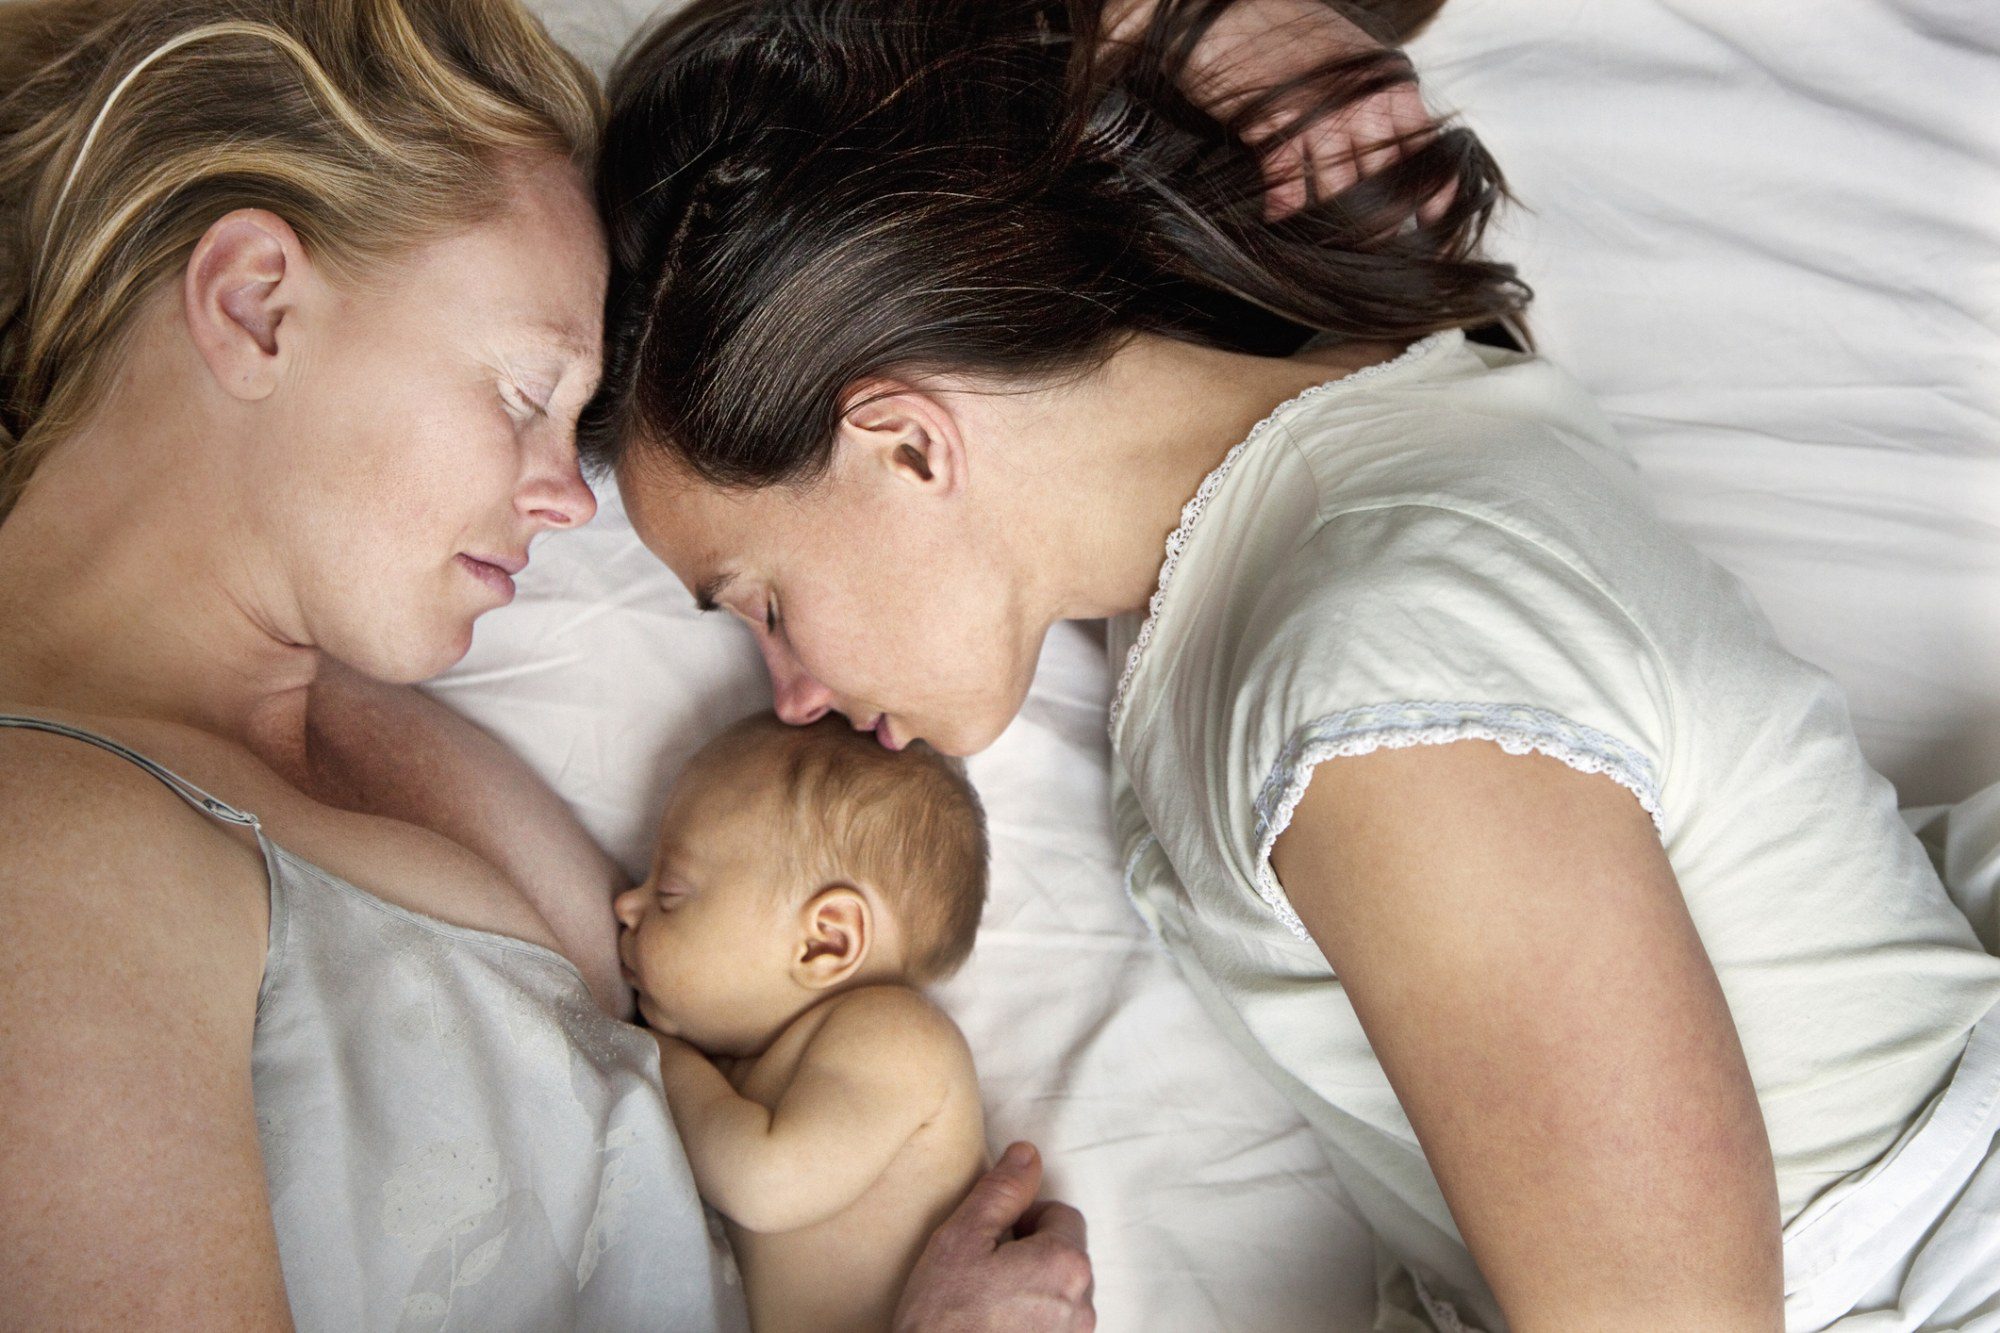 lesbian couple snuggling with sleeping baby